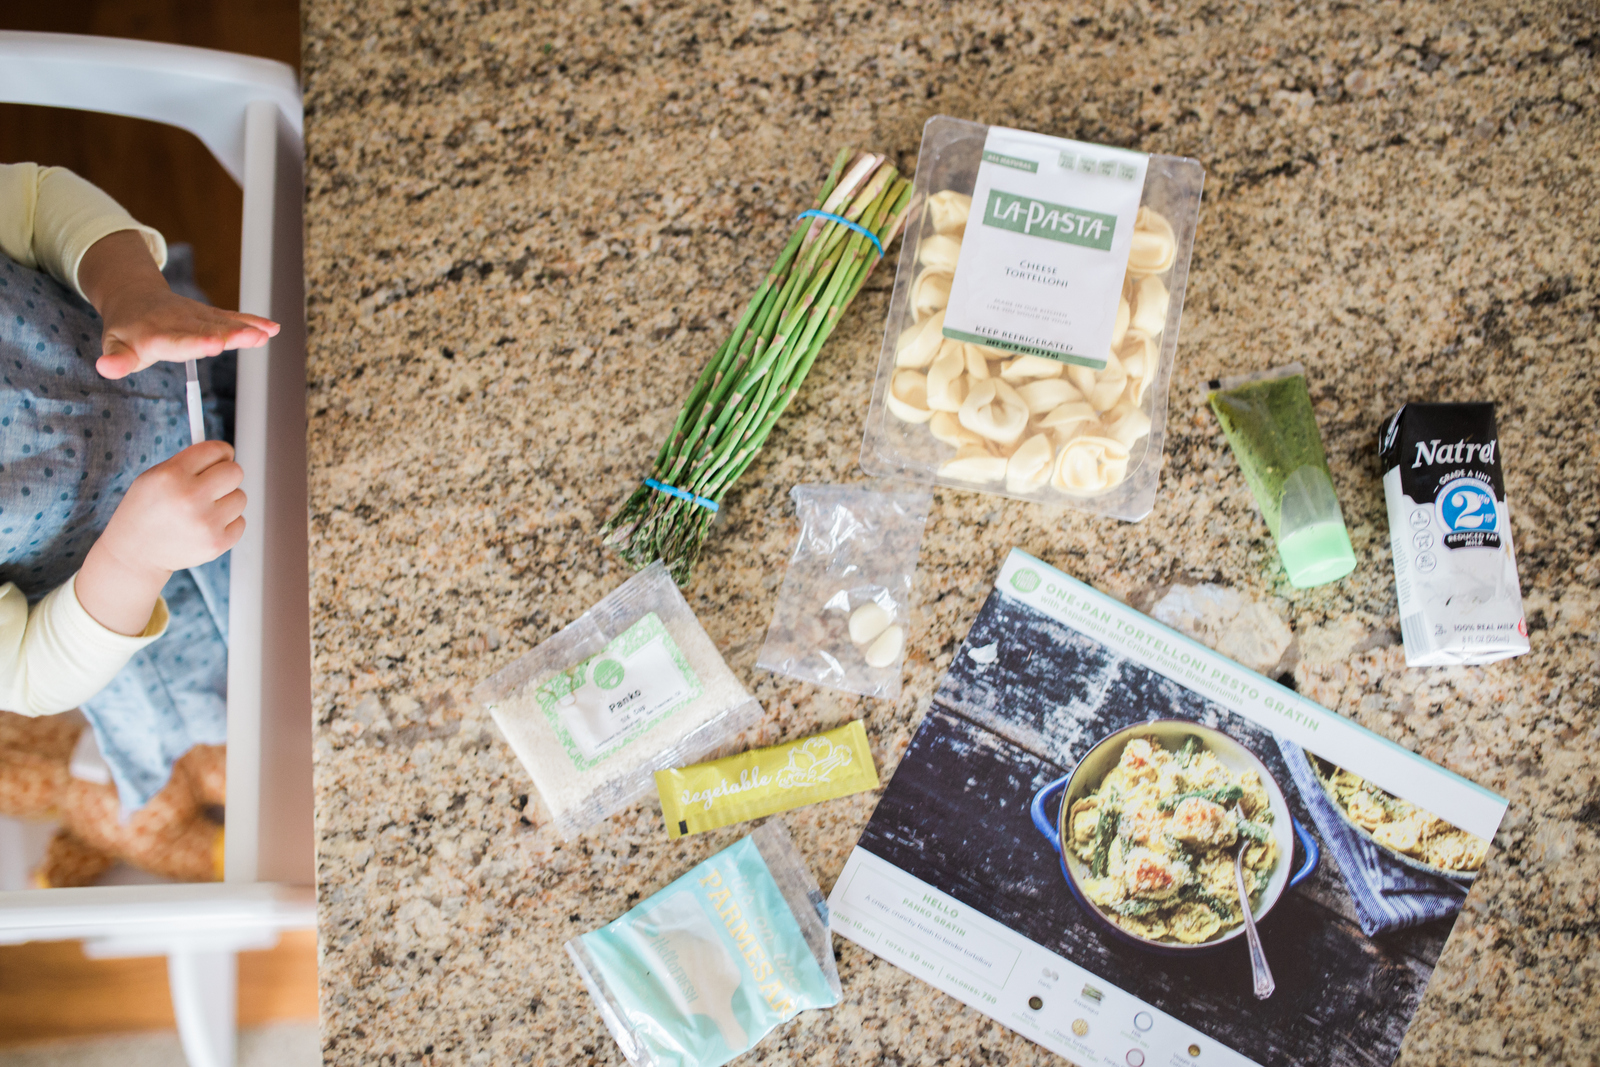 The Ultimate Hello Fresh Review With a Coupon by lifestyle blogger Sandy A La Mode